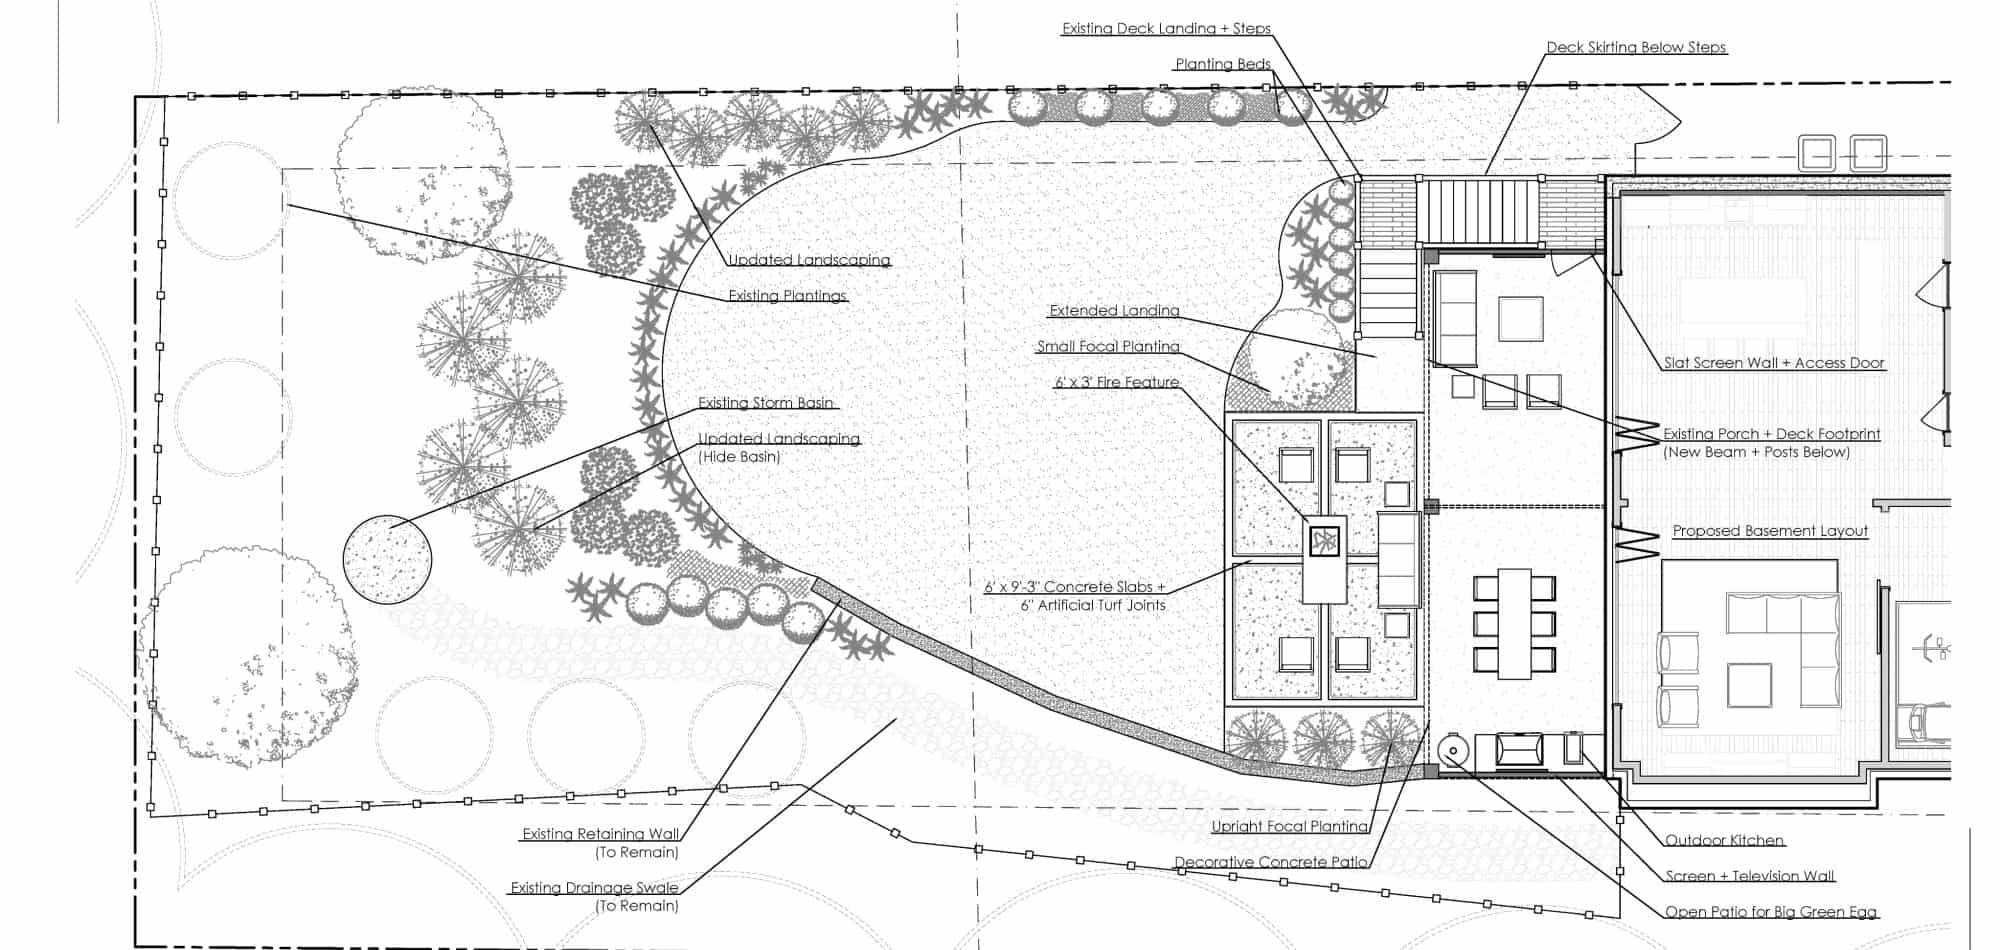 Landscaping plan concept